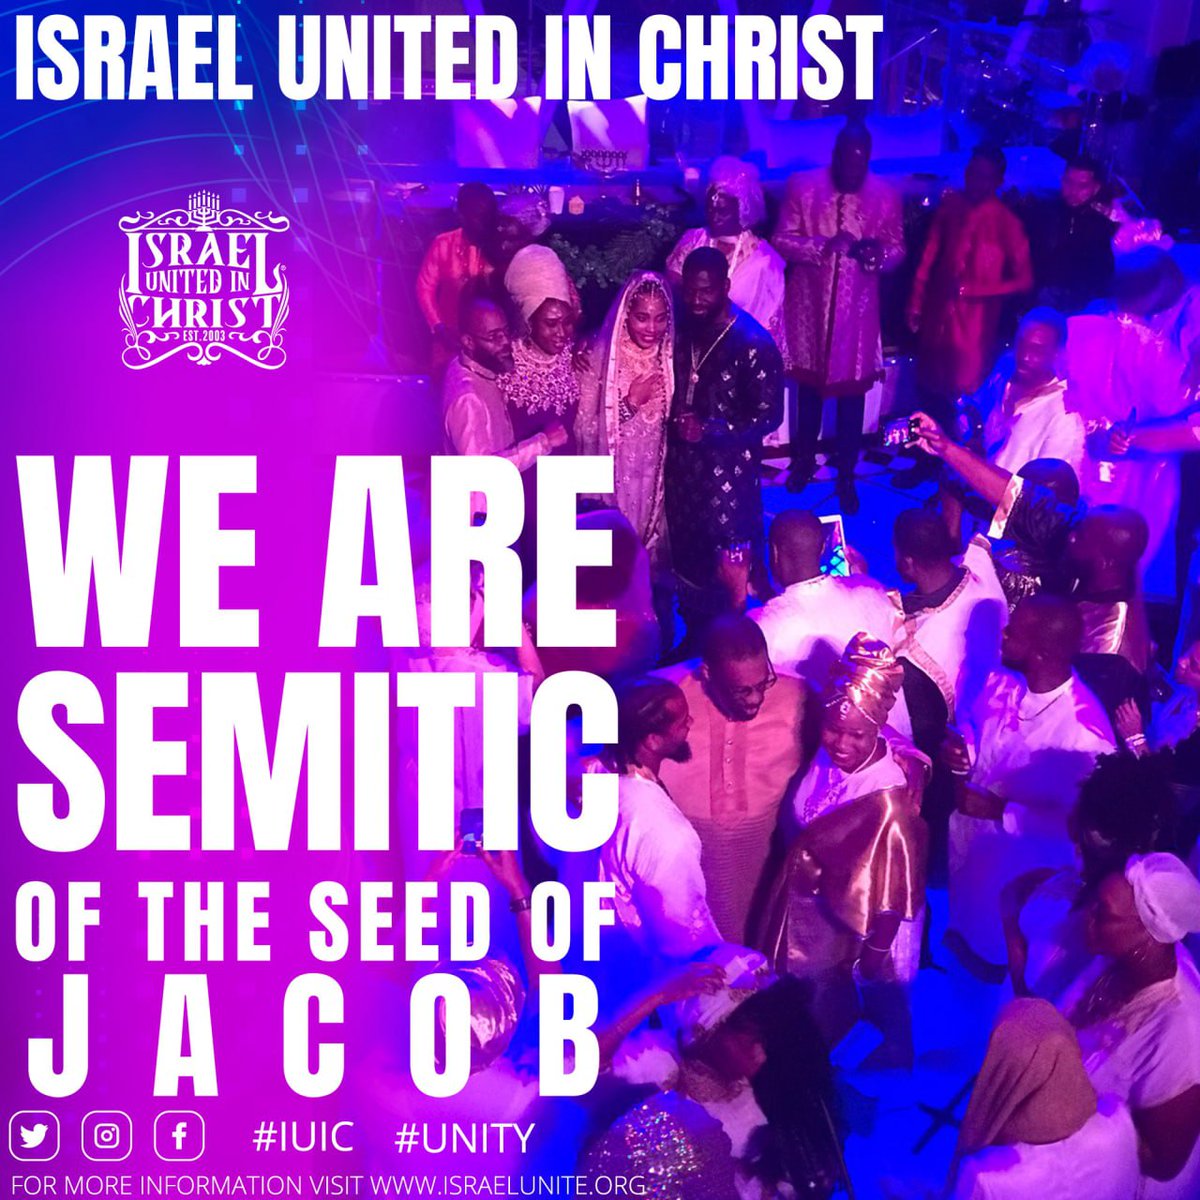 Psalms 133:1
Behold, how good and how pleasant it is for brethren to dwell together in unity!

Visit our website here
solo.to/unitedinchrist

youtube.com/@iuicintheclas…

#IUIC #IsraelUnitedInChrist #TheProphetsAreBack #Blacks #Hispanic #NativeAmericans #GODSArmy #Israelite #Truth